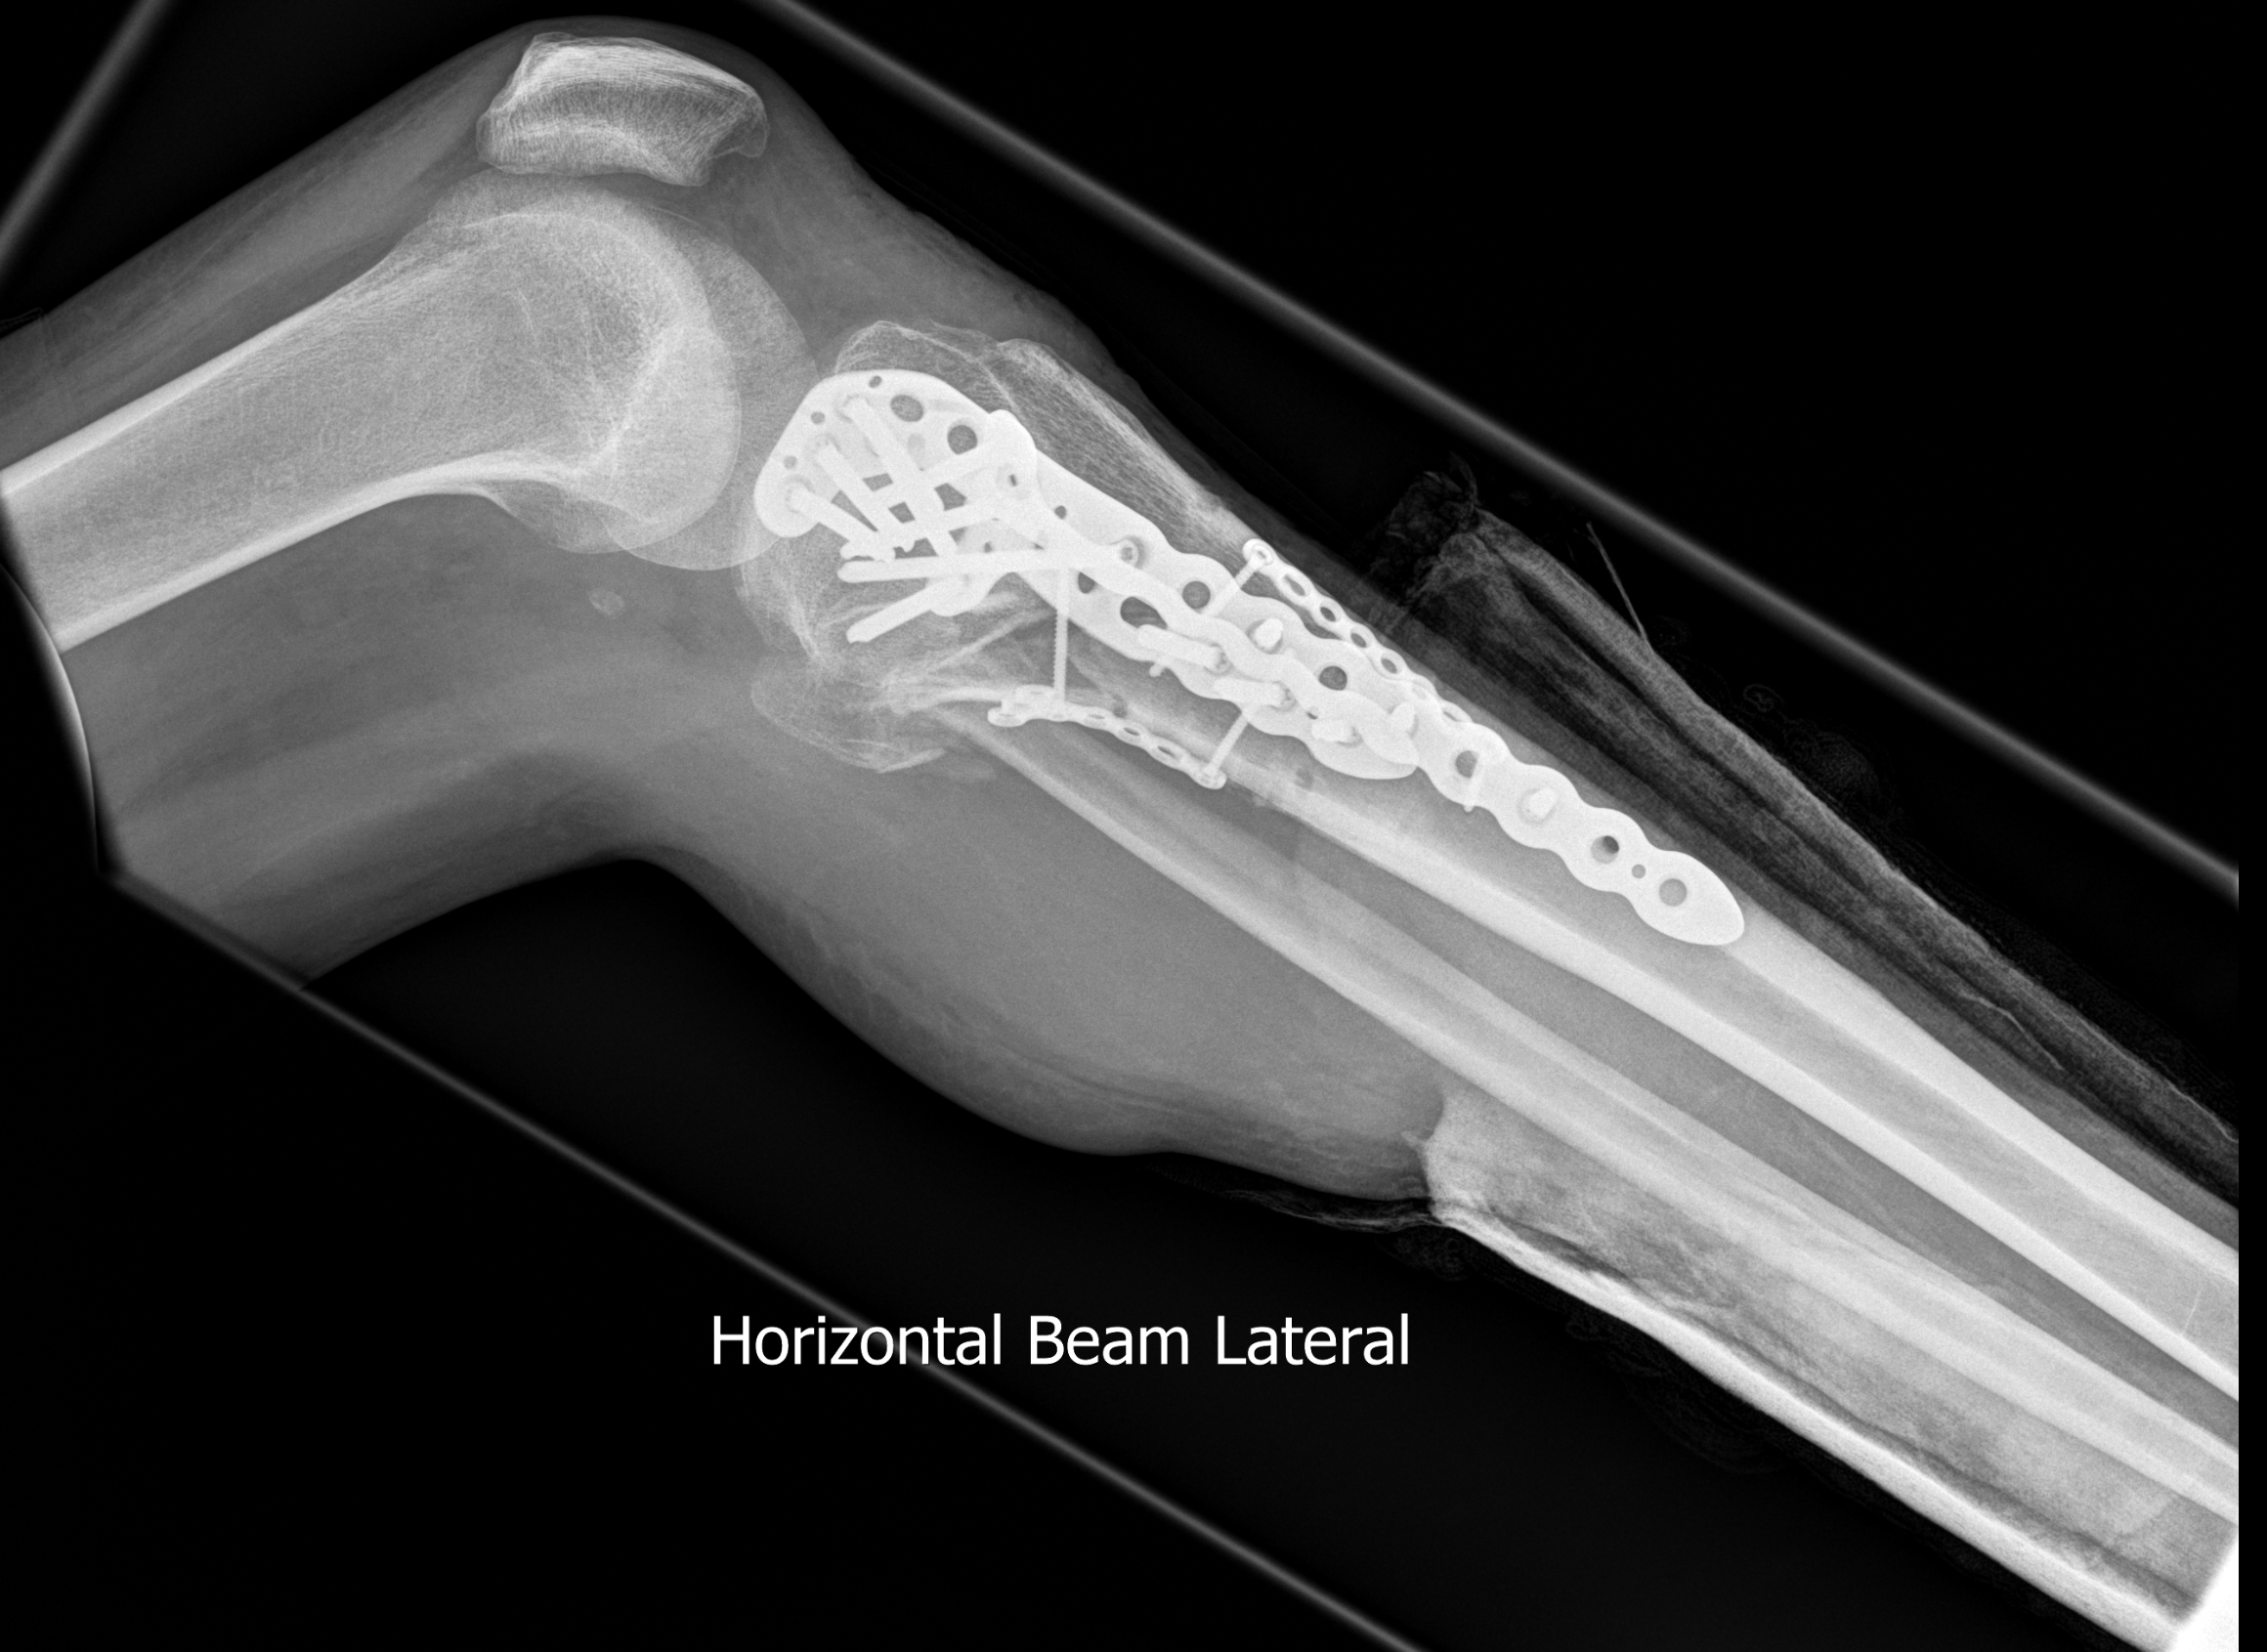 A x-ray image showing a leg below with significant surgical work